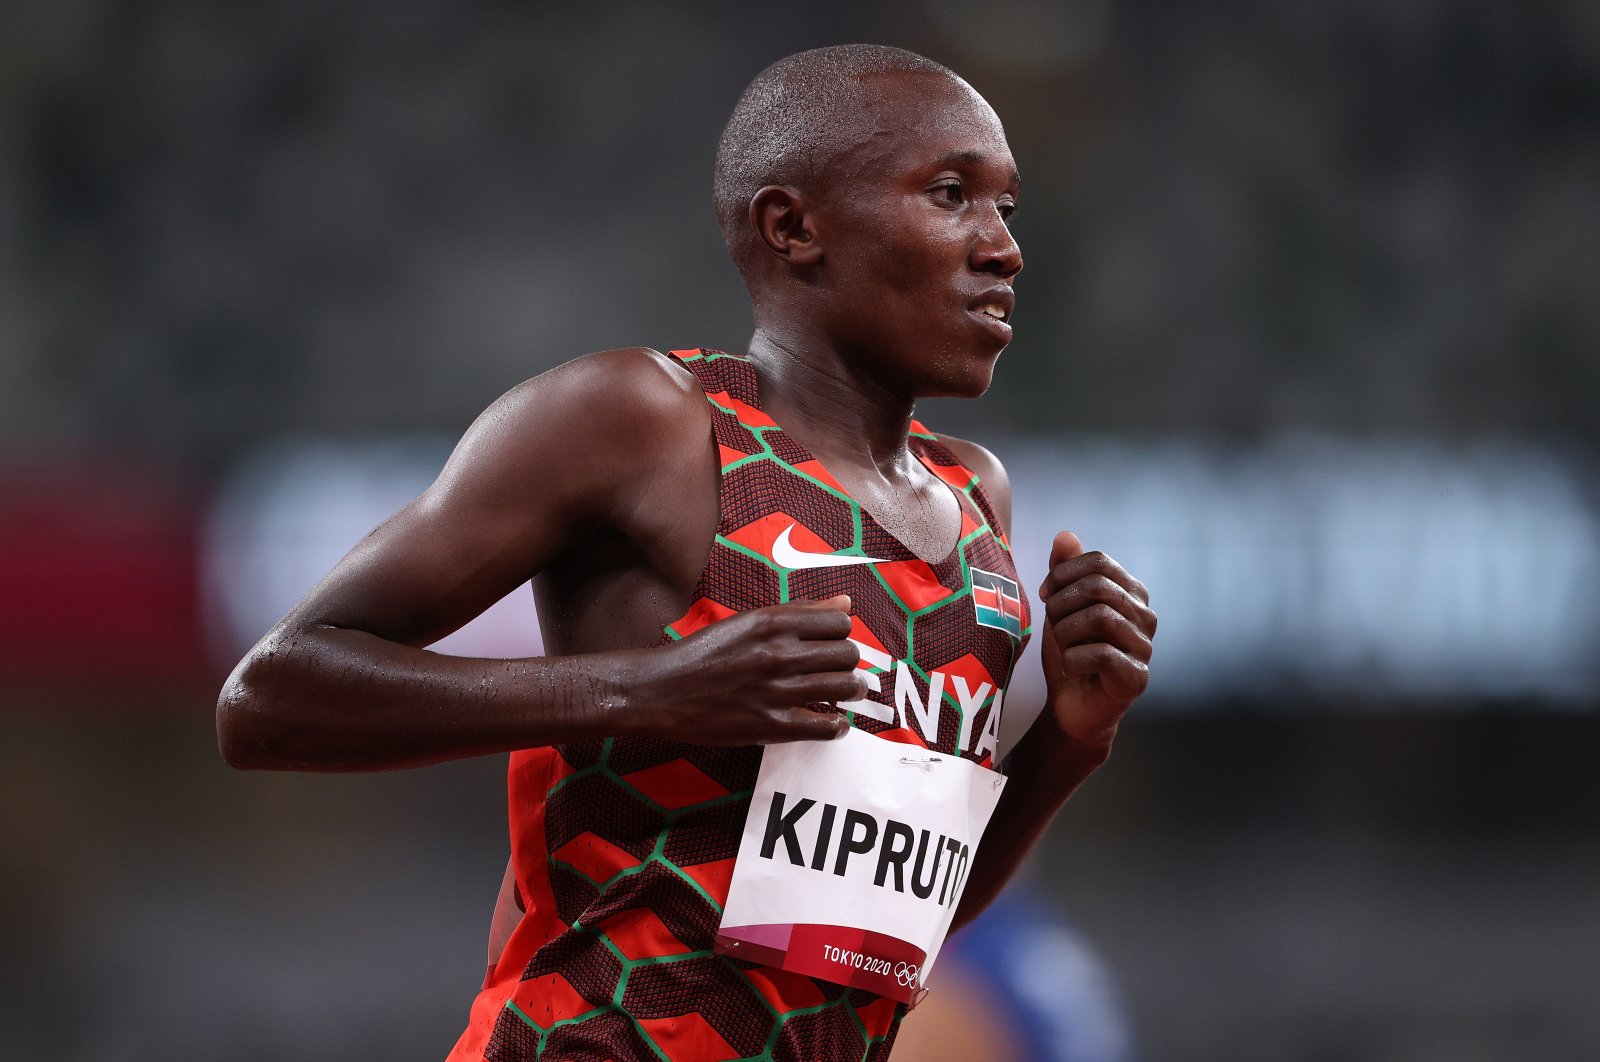 Kenya&#039;s Rhonex Kipruto competes in the Men&#039;s 10,000-meter final on day seven of the Tokyo 2020 Olympic Games at Olympic Stadium, Tokyo, Japan, July 30, 2021. (Getty Images Photo)